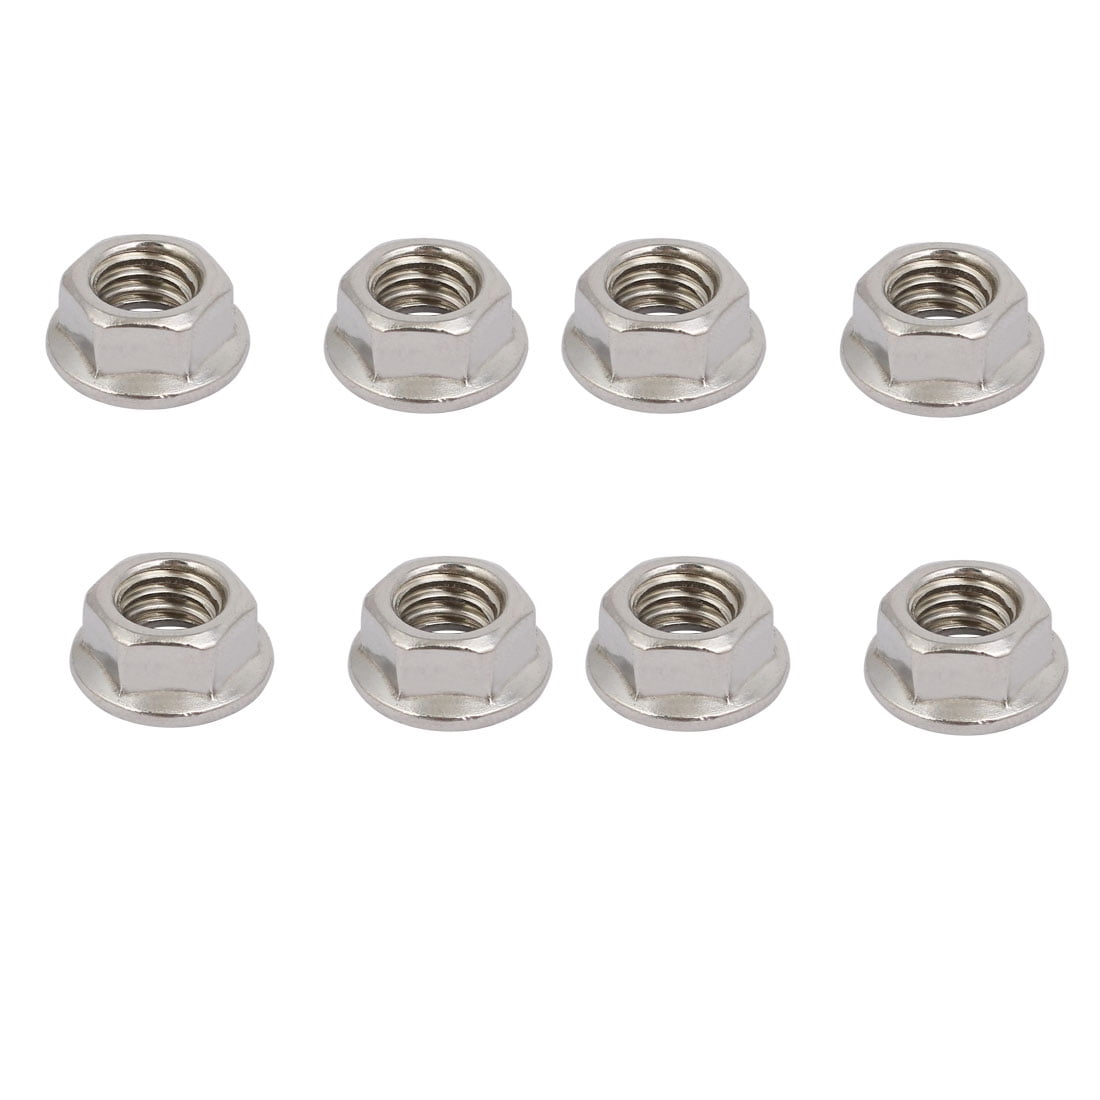 UNC Serrated Flange nut 1/4-20 5/16-18 PITCH 3/8/-16 Right handed Hex nuts 